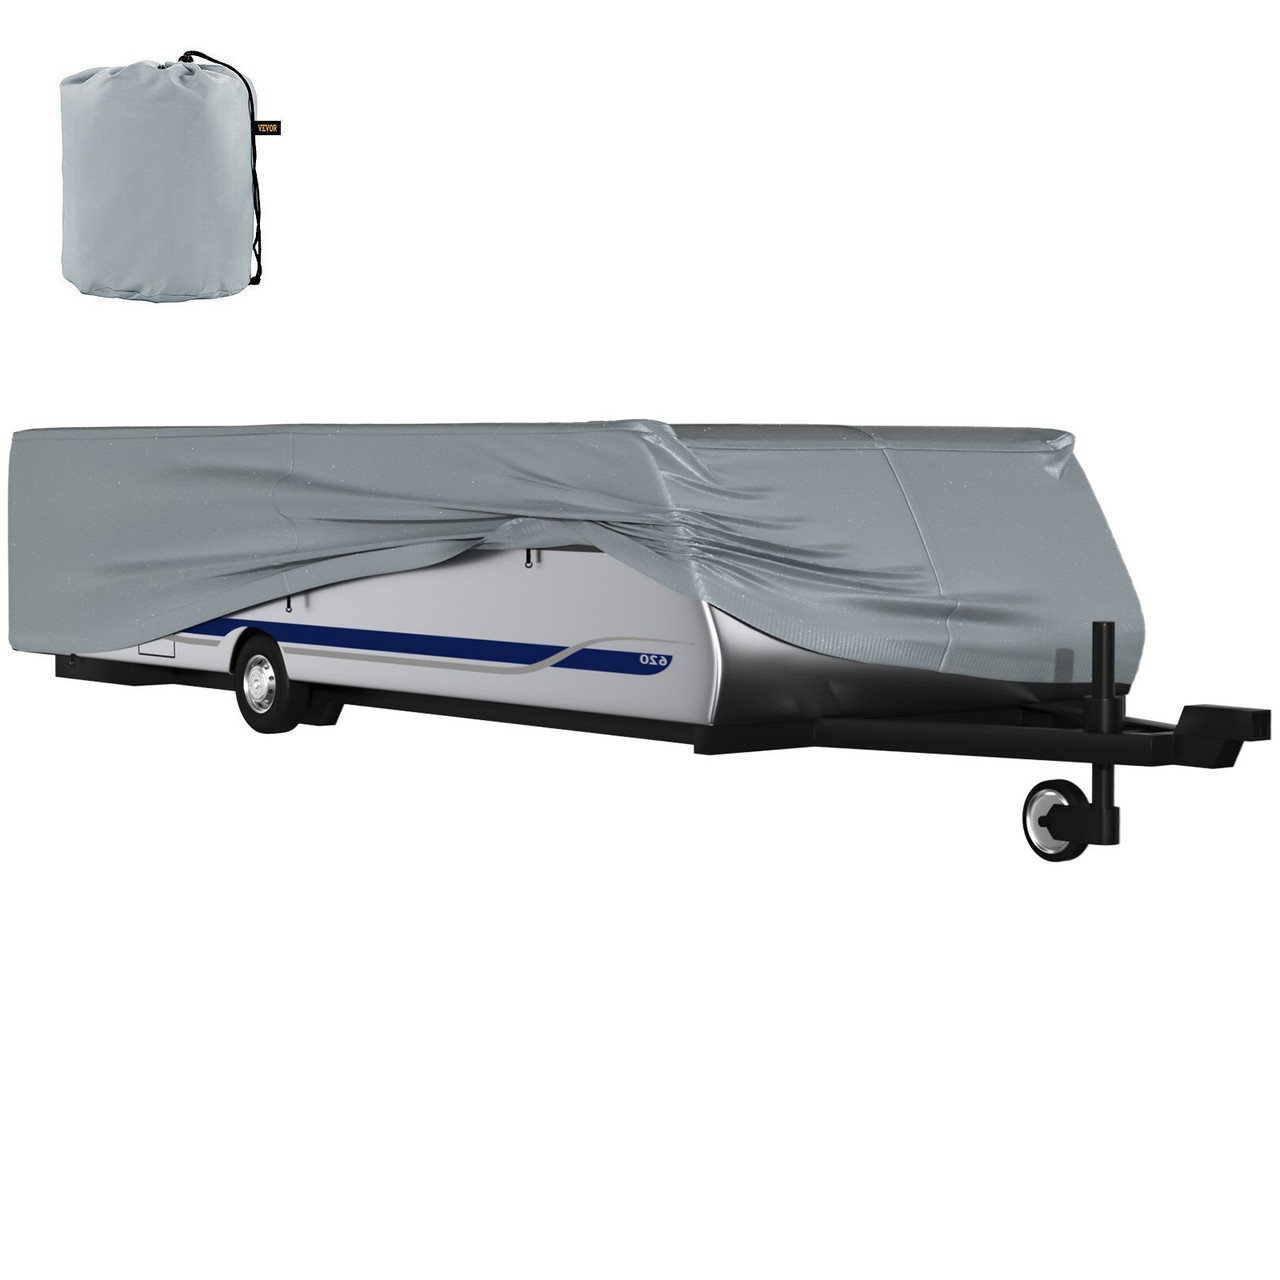 Pop Up Camper Cover Pop Up RV Cover Fit for 14-16 ft Long Trailers